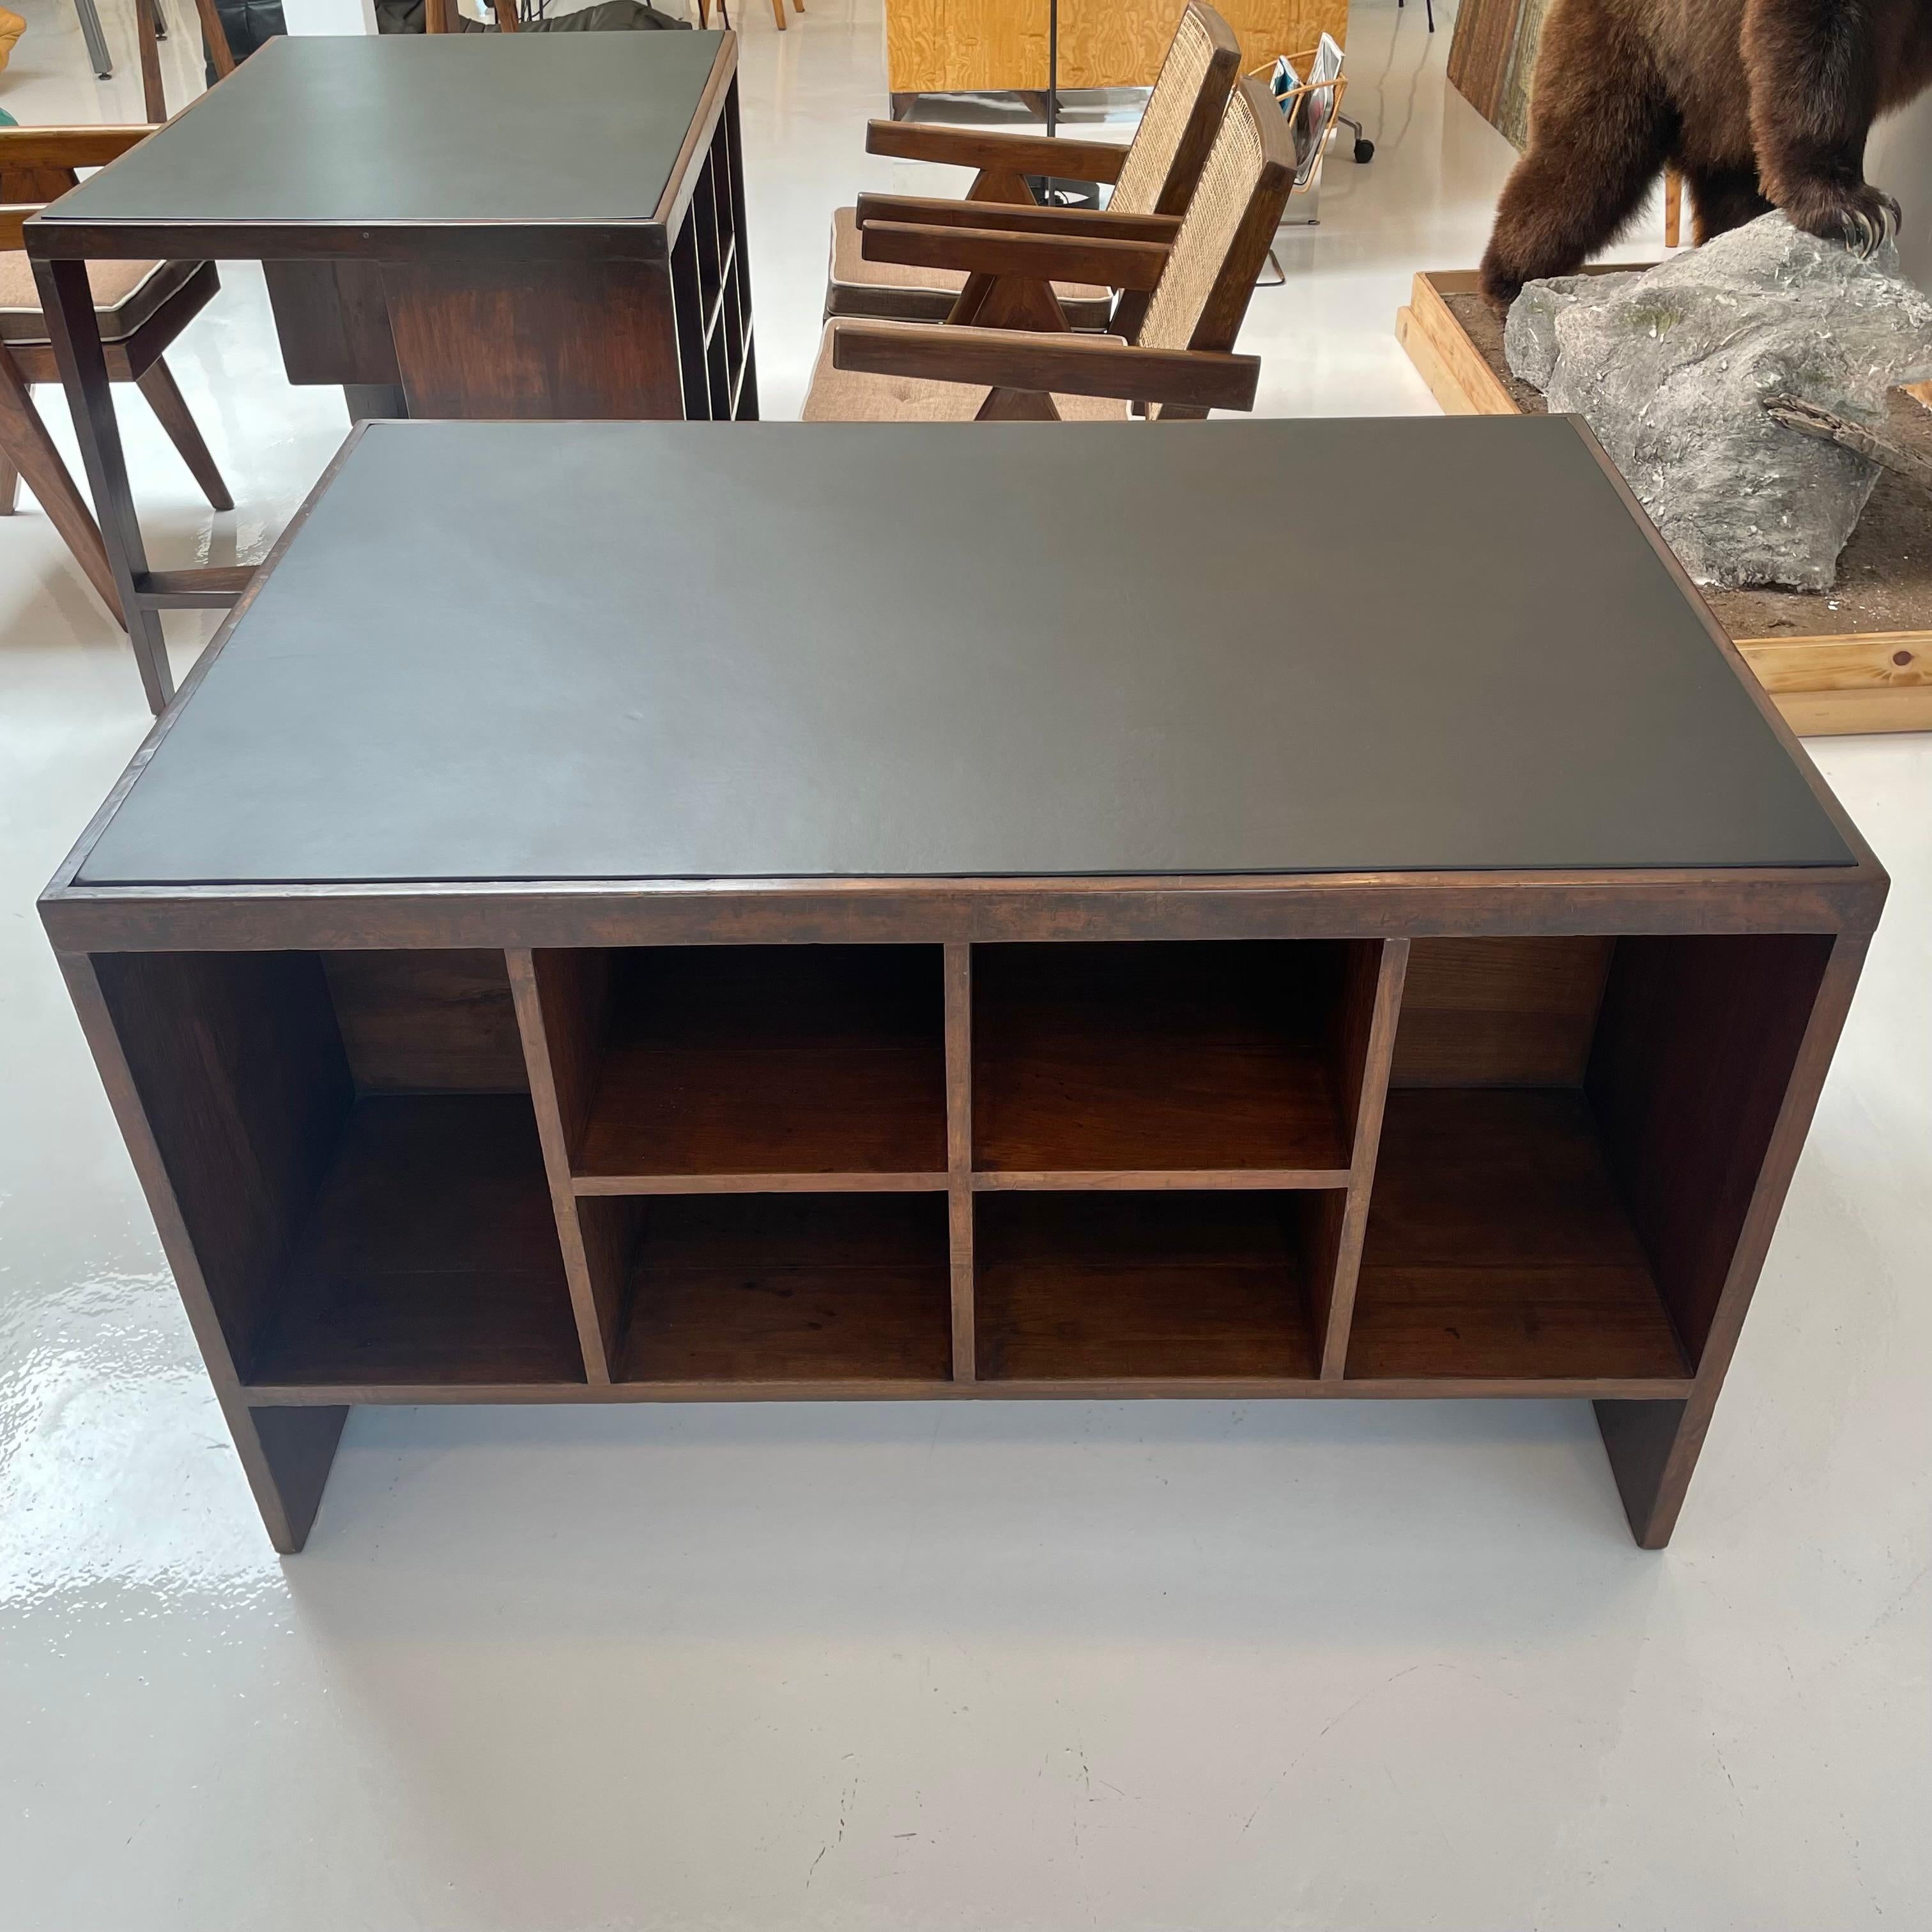 Pierre Jeanneret Desk, 1950s Chandigargh In Excellent Condition For Sale In Los Angeles, CA